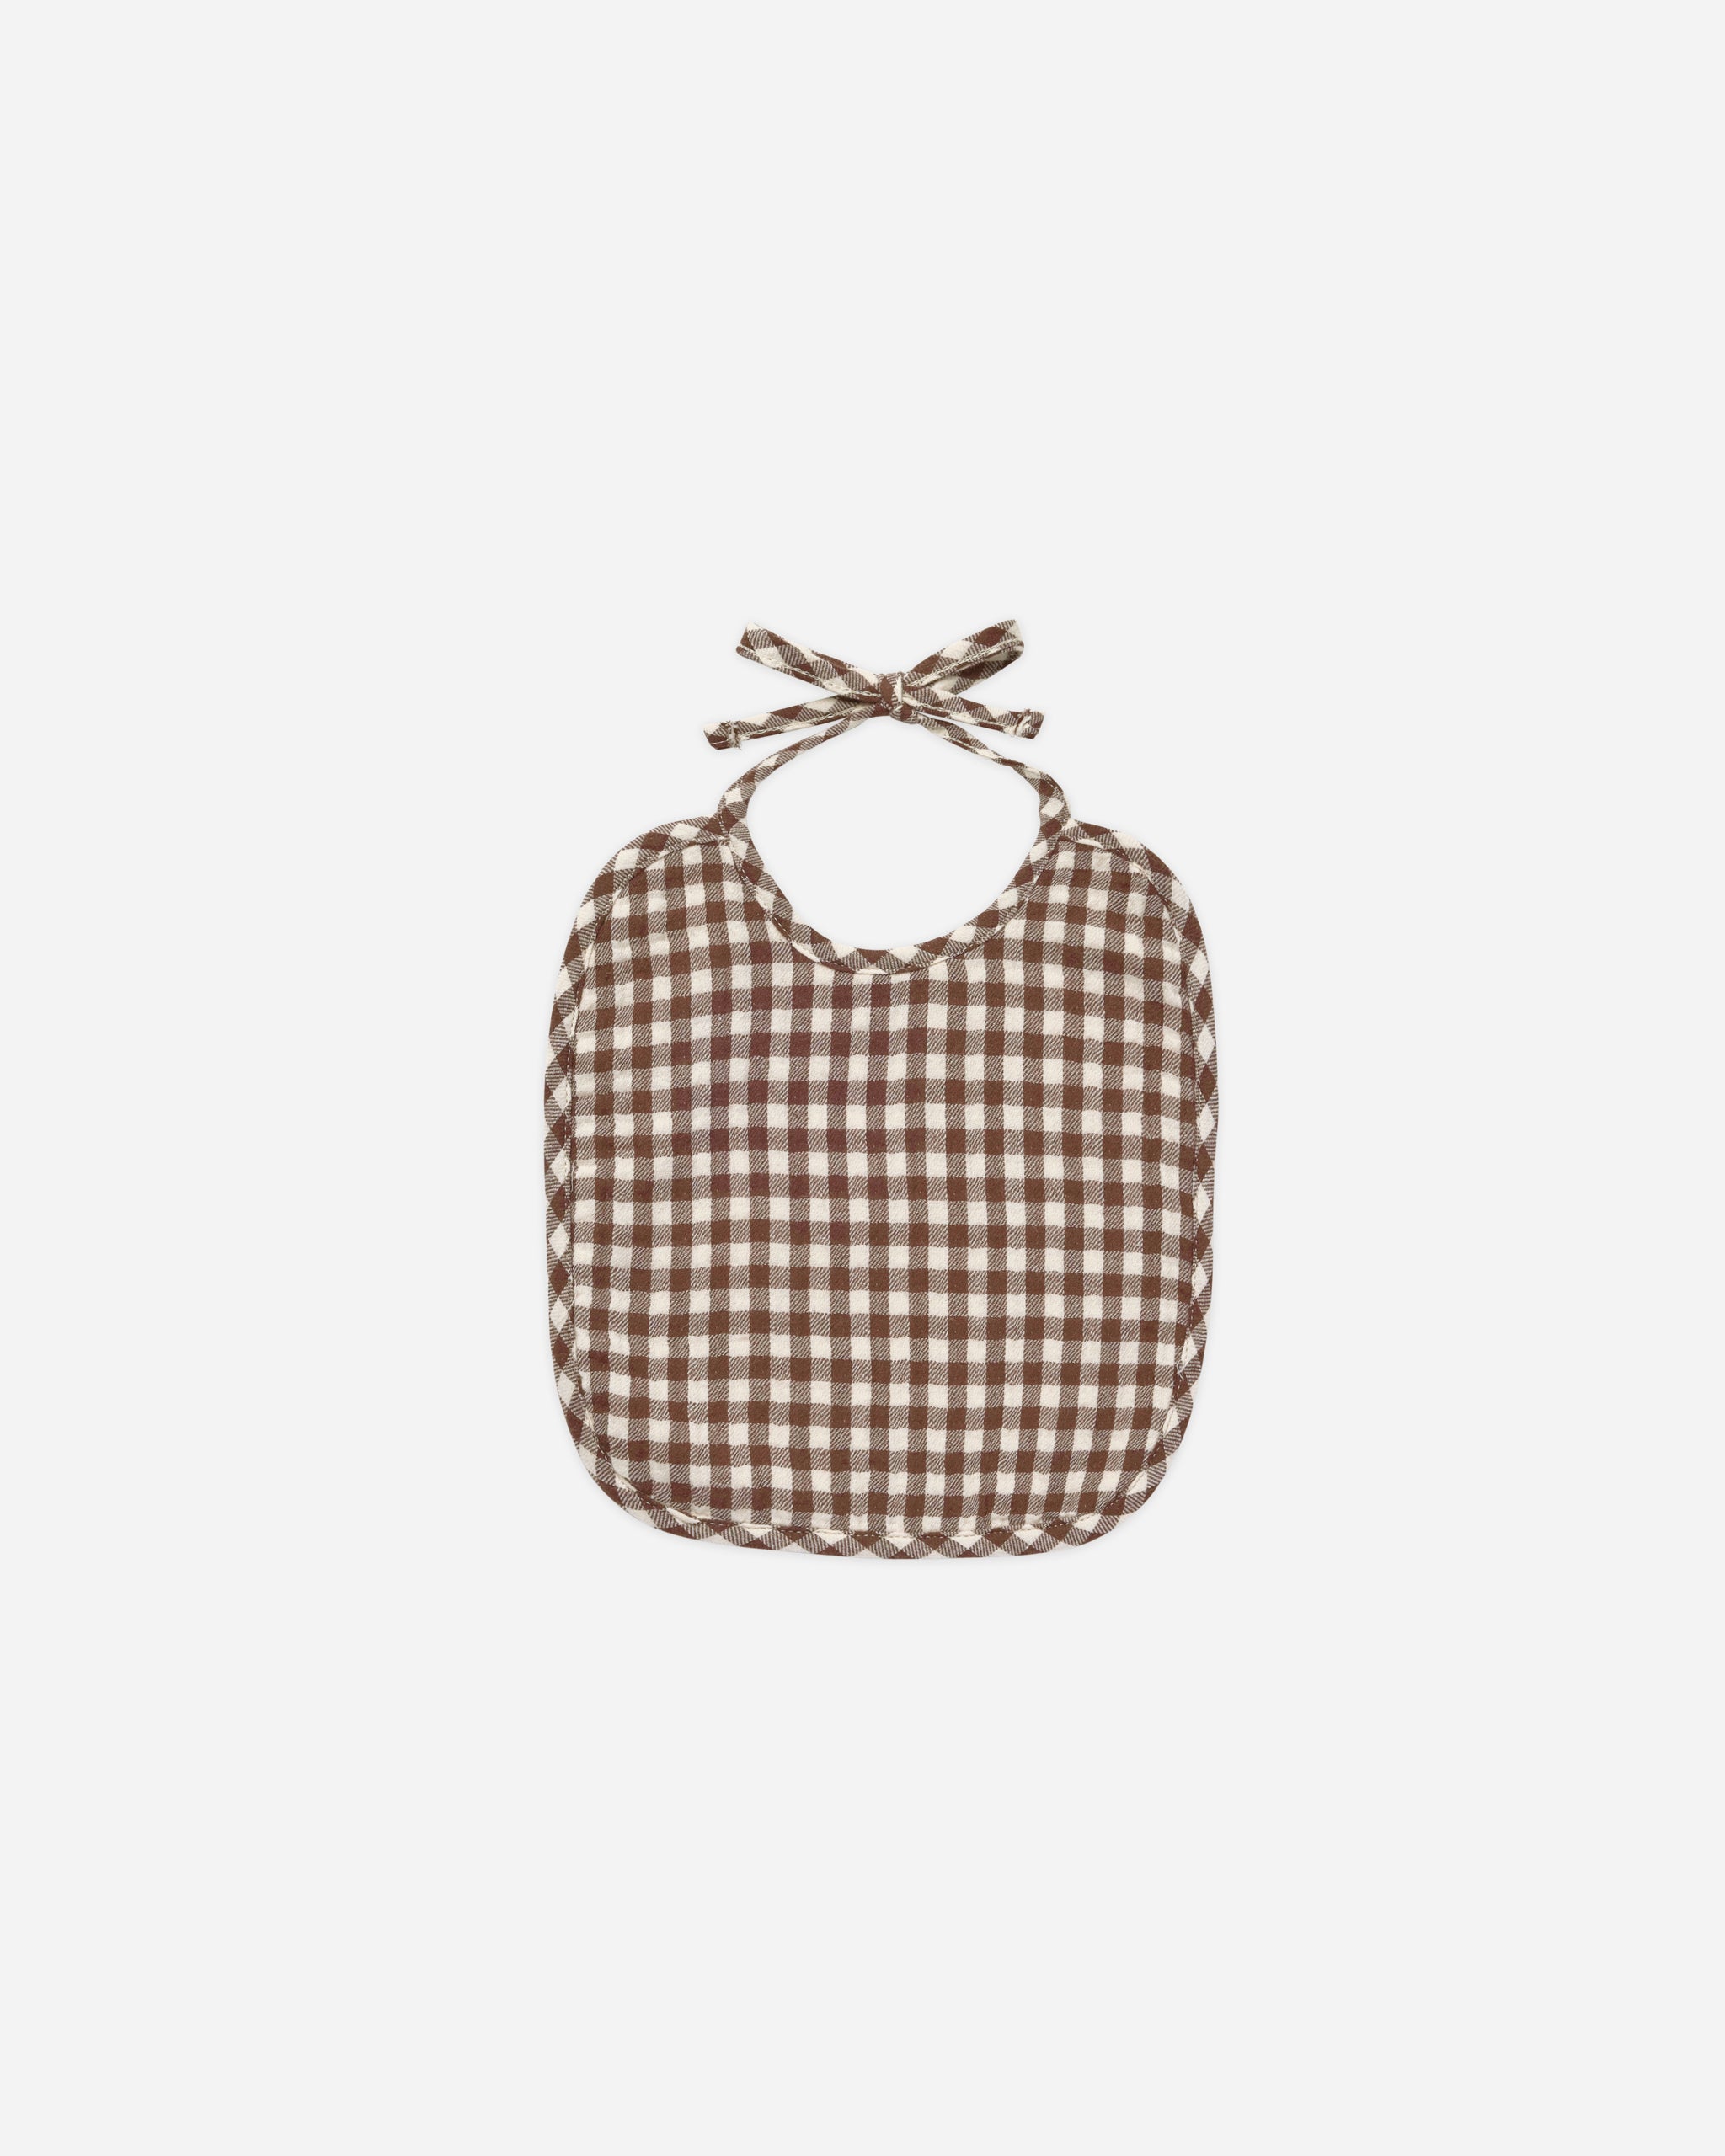 Woven Tie Bib || Plum Gingham - Rylee + Cru | Kids Clothes | Trendy Baby Clothes | Modern Infant Outfits |